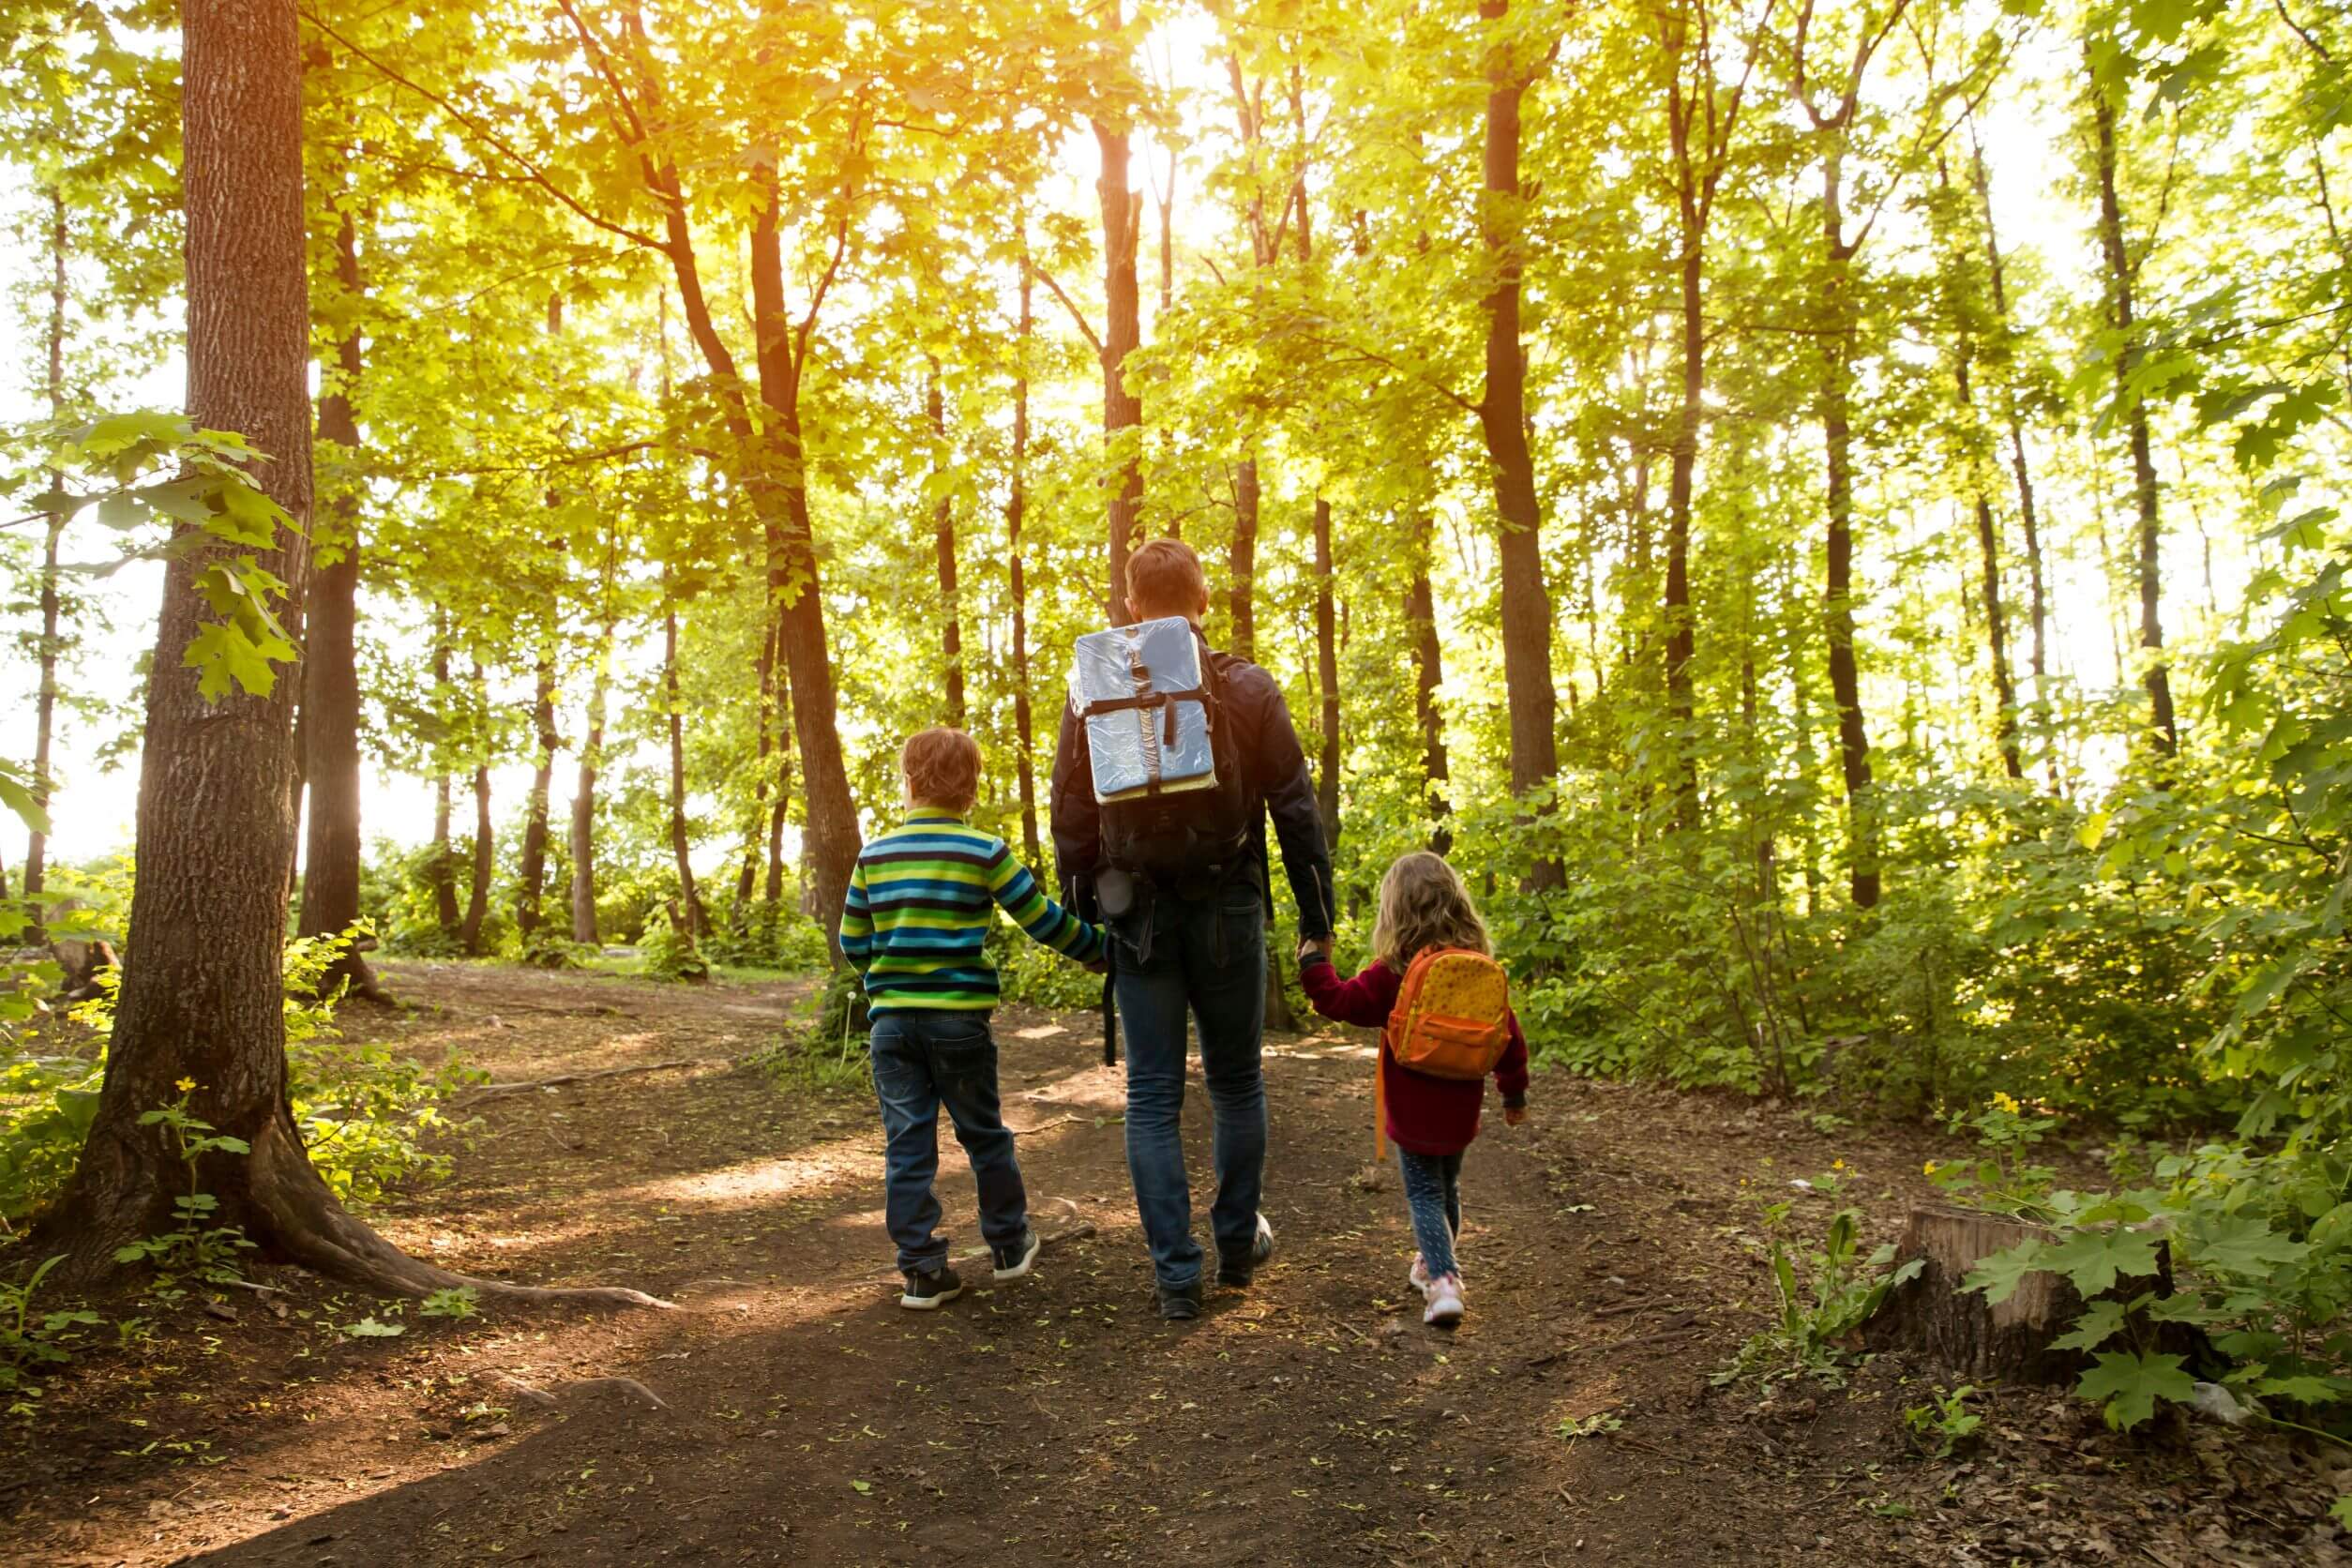 father hiking with two kids in forest holding hands wearing backpacks